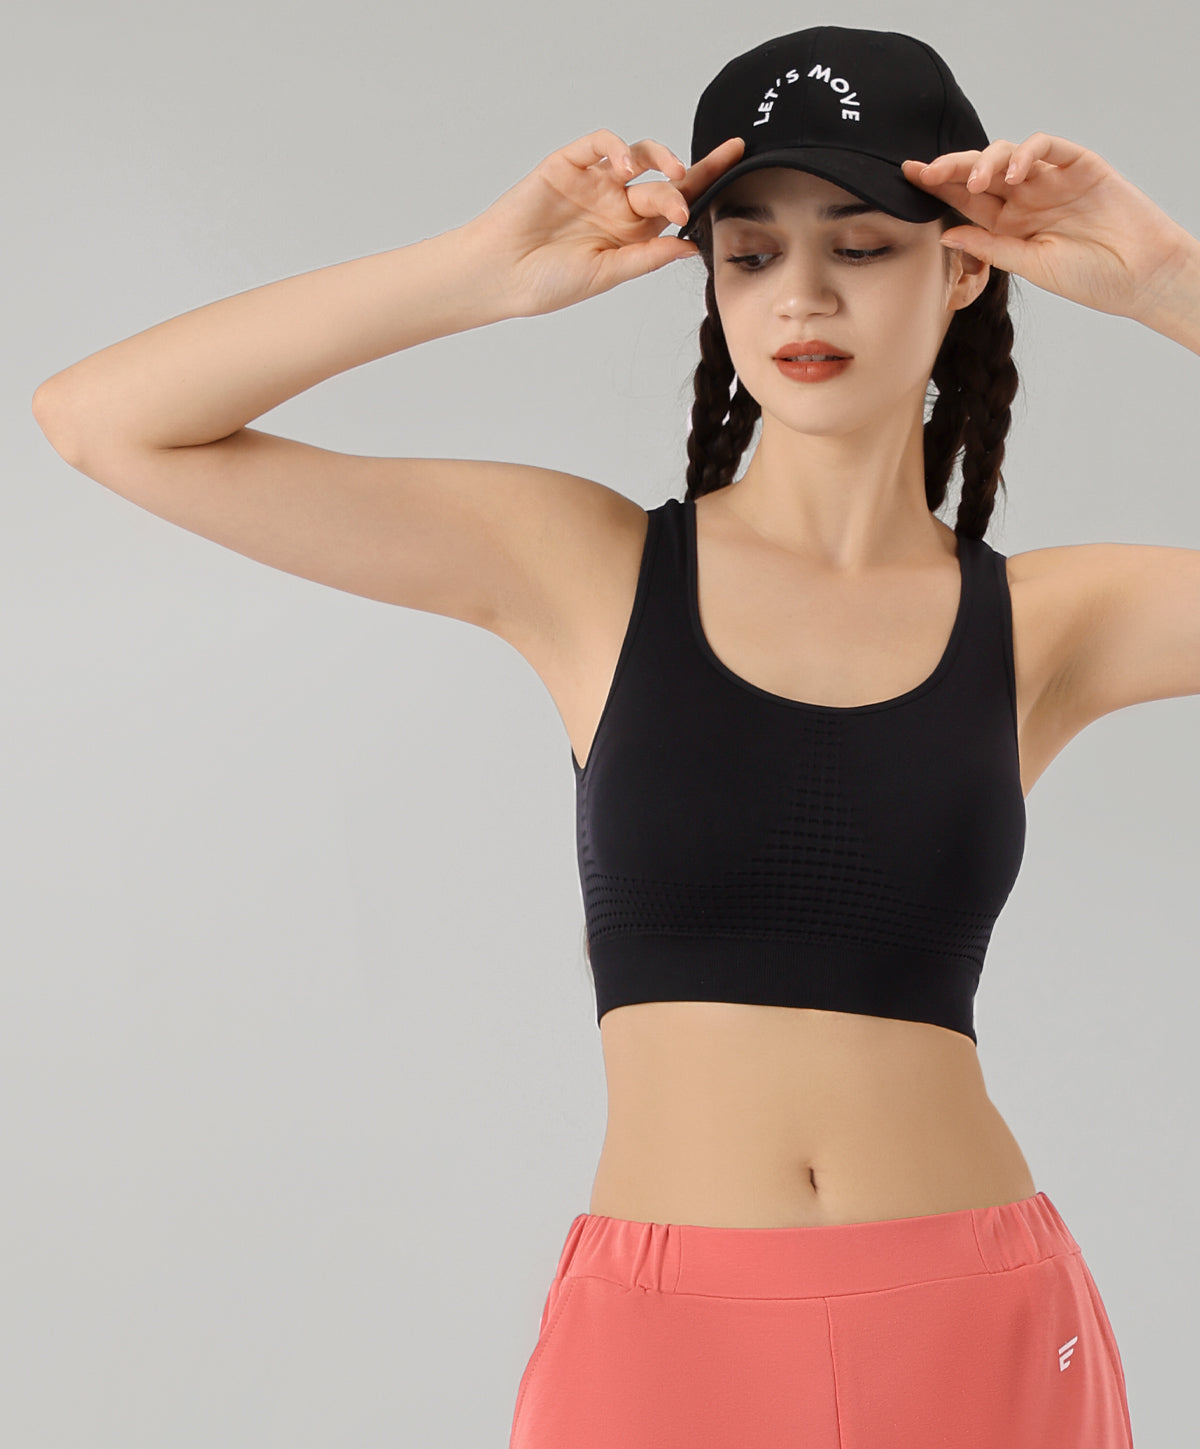 Sunway Velocity Mall - Energized Sports Bra at RM1??! YES no doubt, we are  selling all sports bra at RM1*/pc with purchase of Pierre Cardin Lingerie  Malaysia Ballerina sports bra. Promotion valid